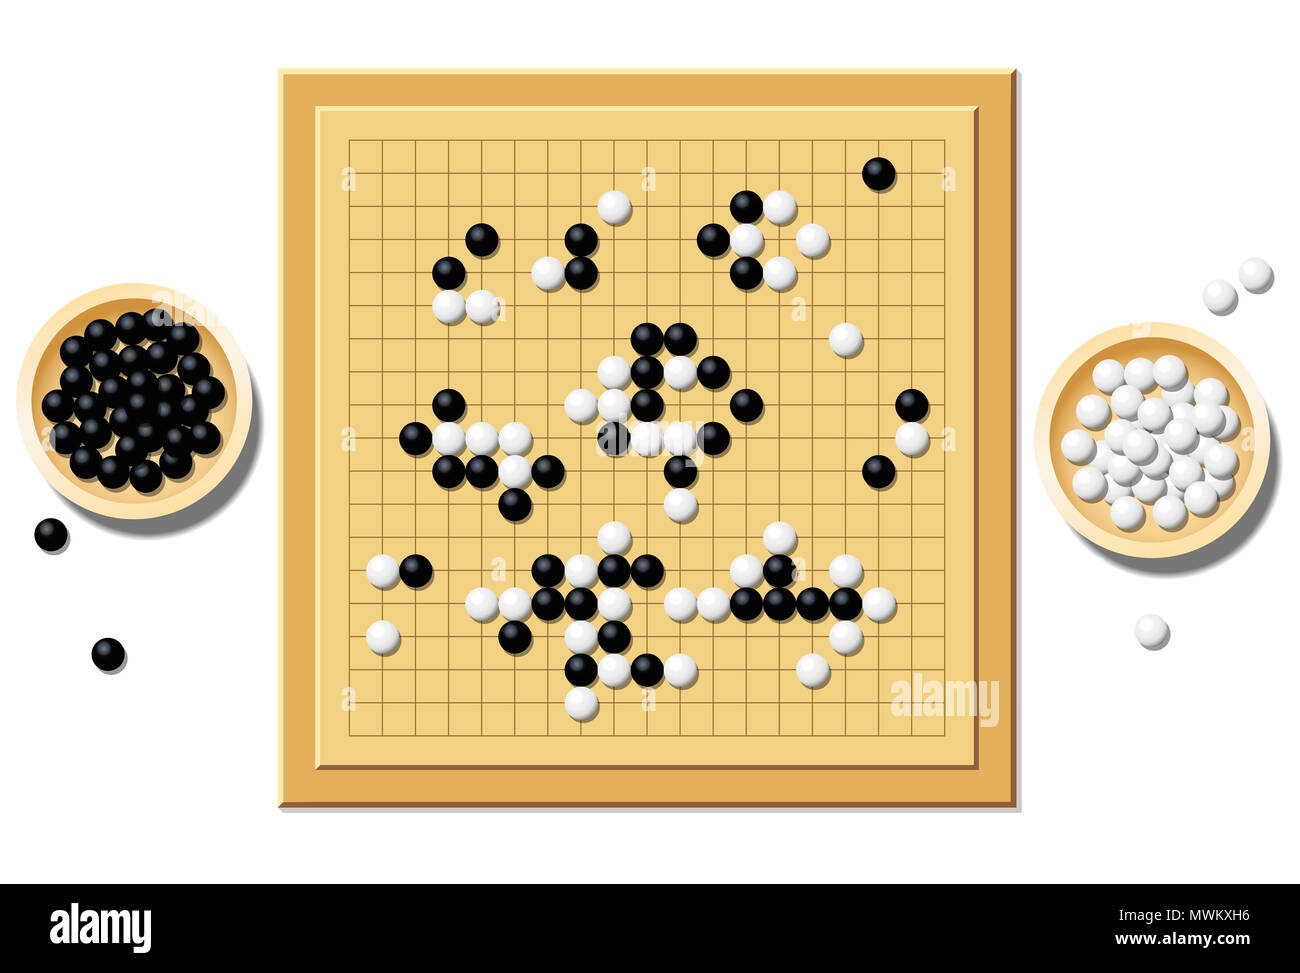 Gobang or go game board with a typical course of game, and two wooden bowls filled with black and white stones - a traditional chinese strategy game. Stock Photo